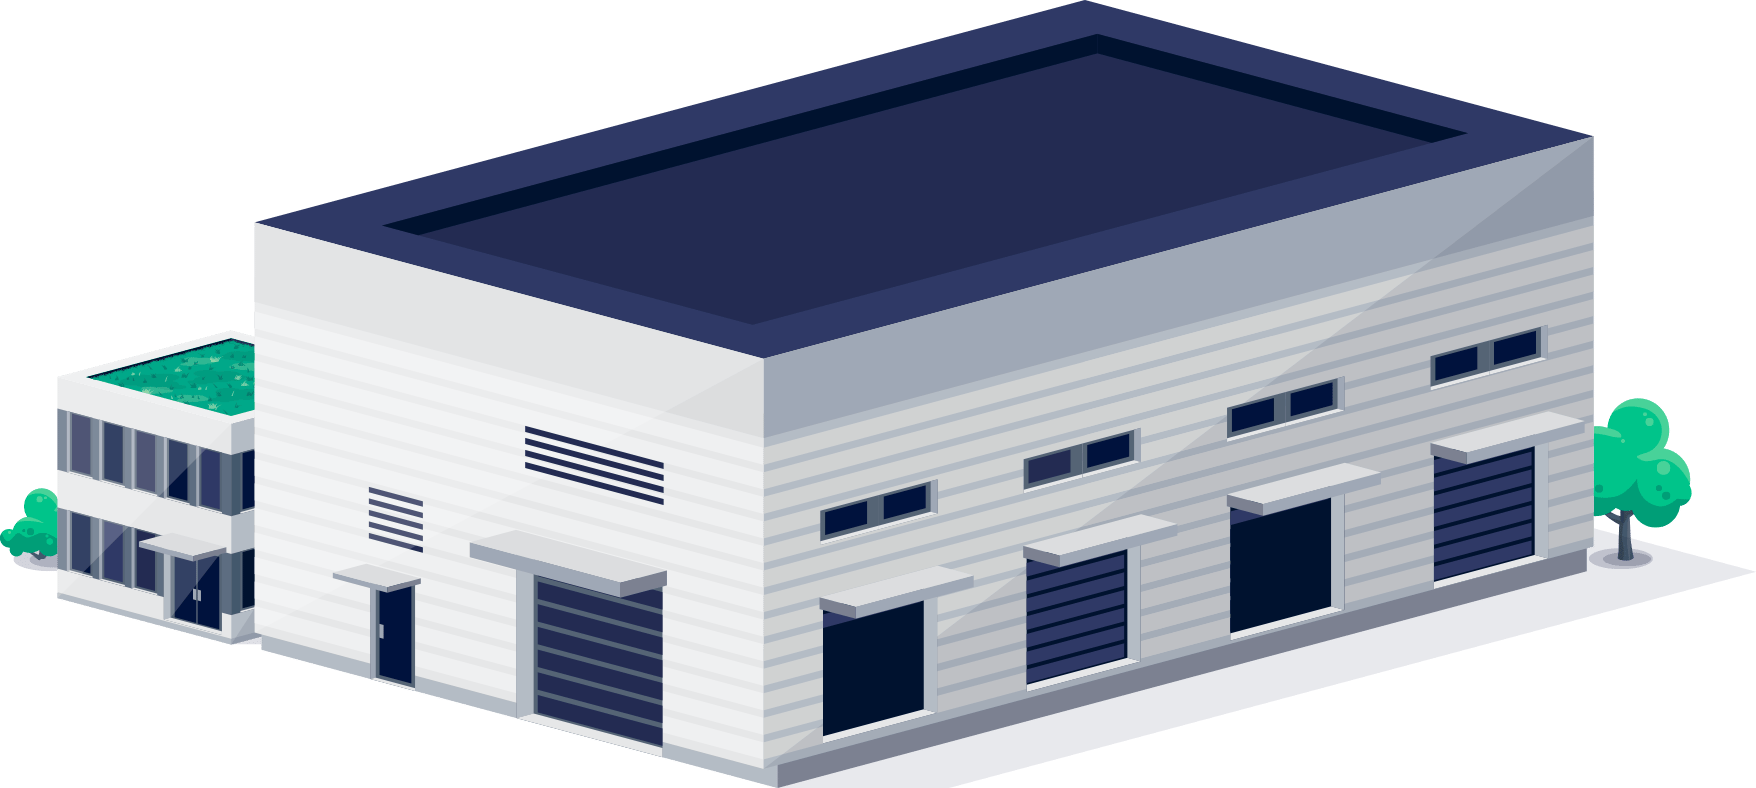 isometric illustration of a manufacturing plant